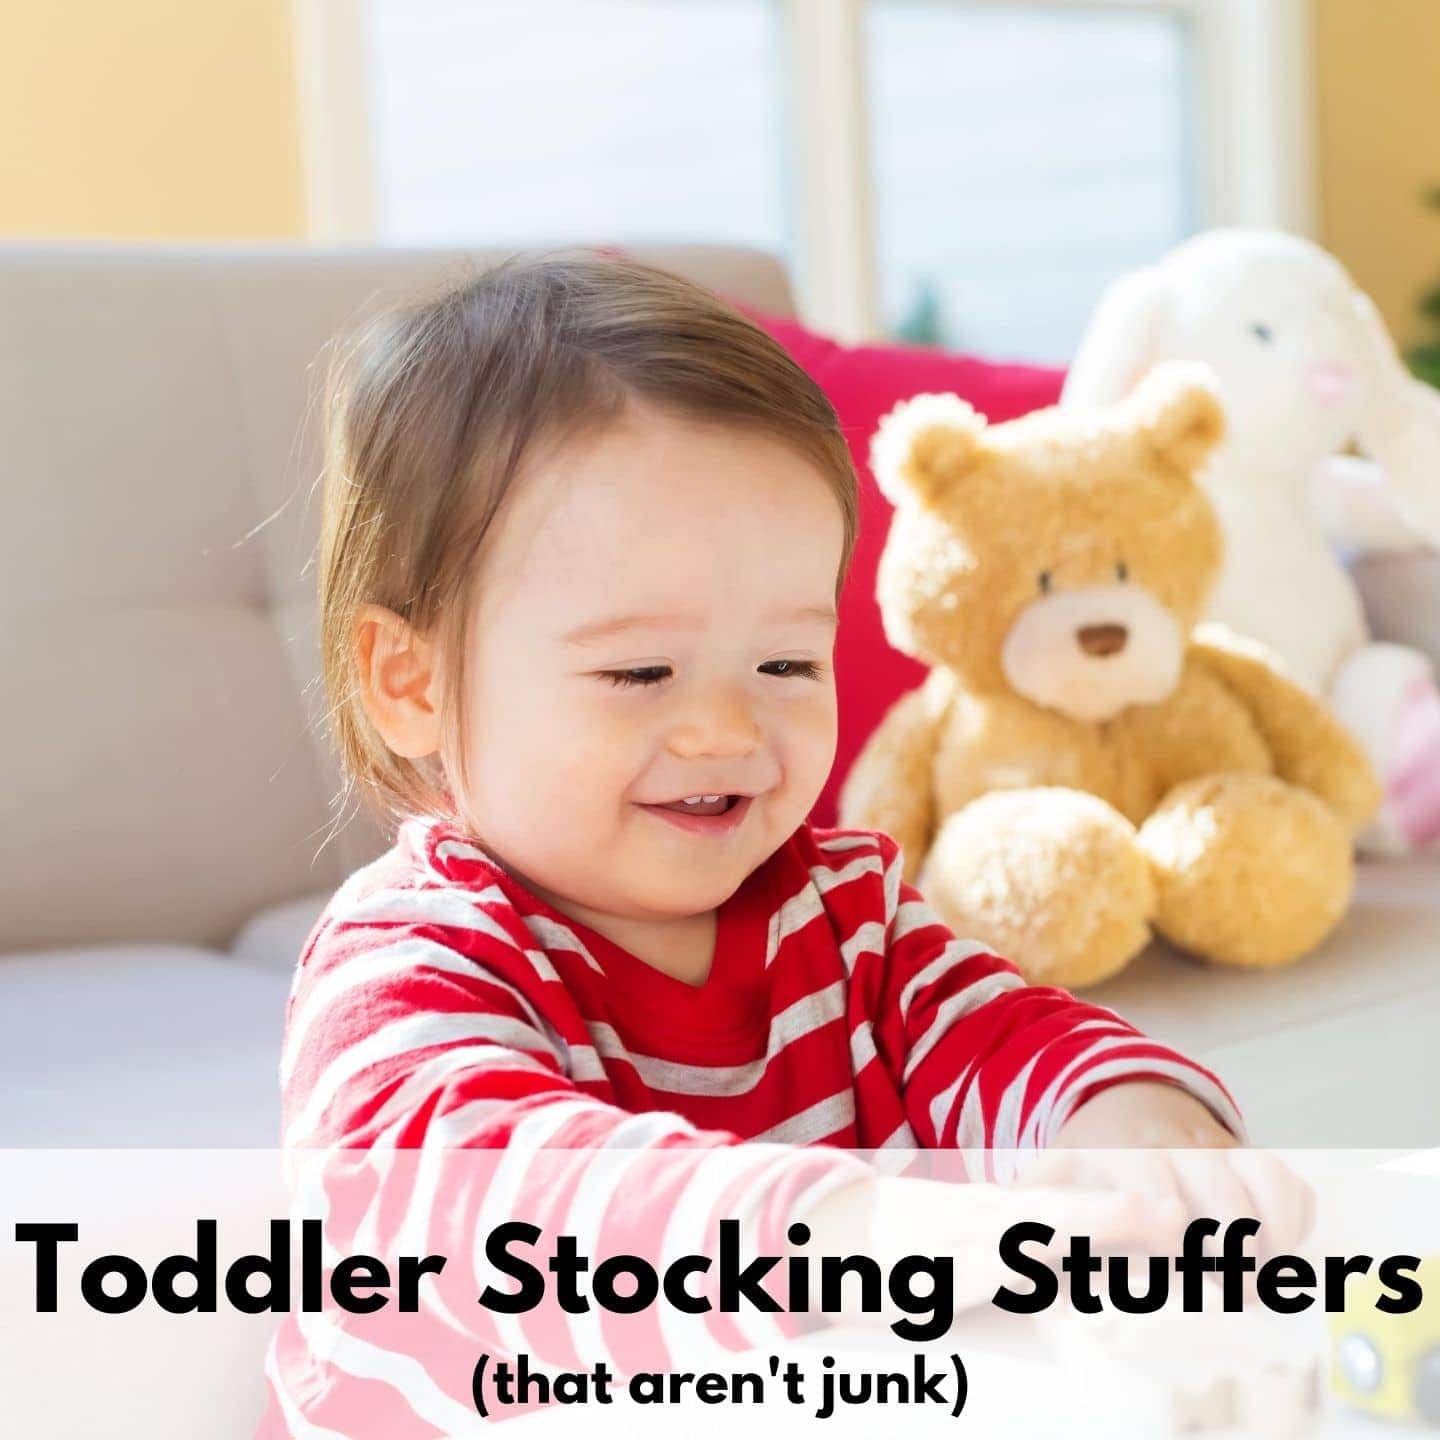 Stocking Stuffers for Toddlers That Aren't Junk NonPlastic, NonCandy